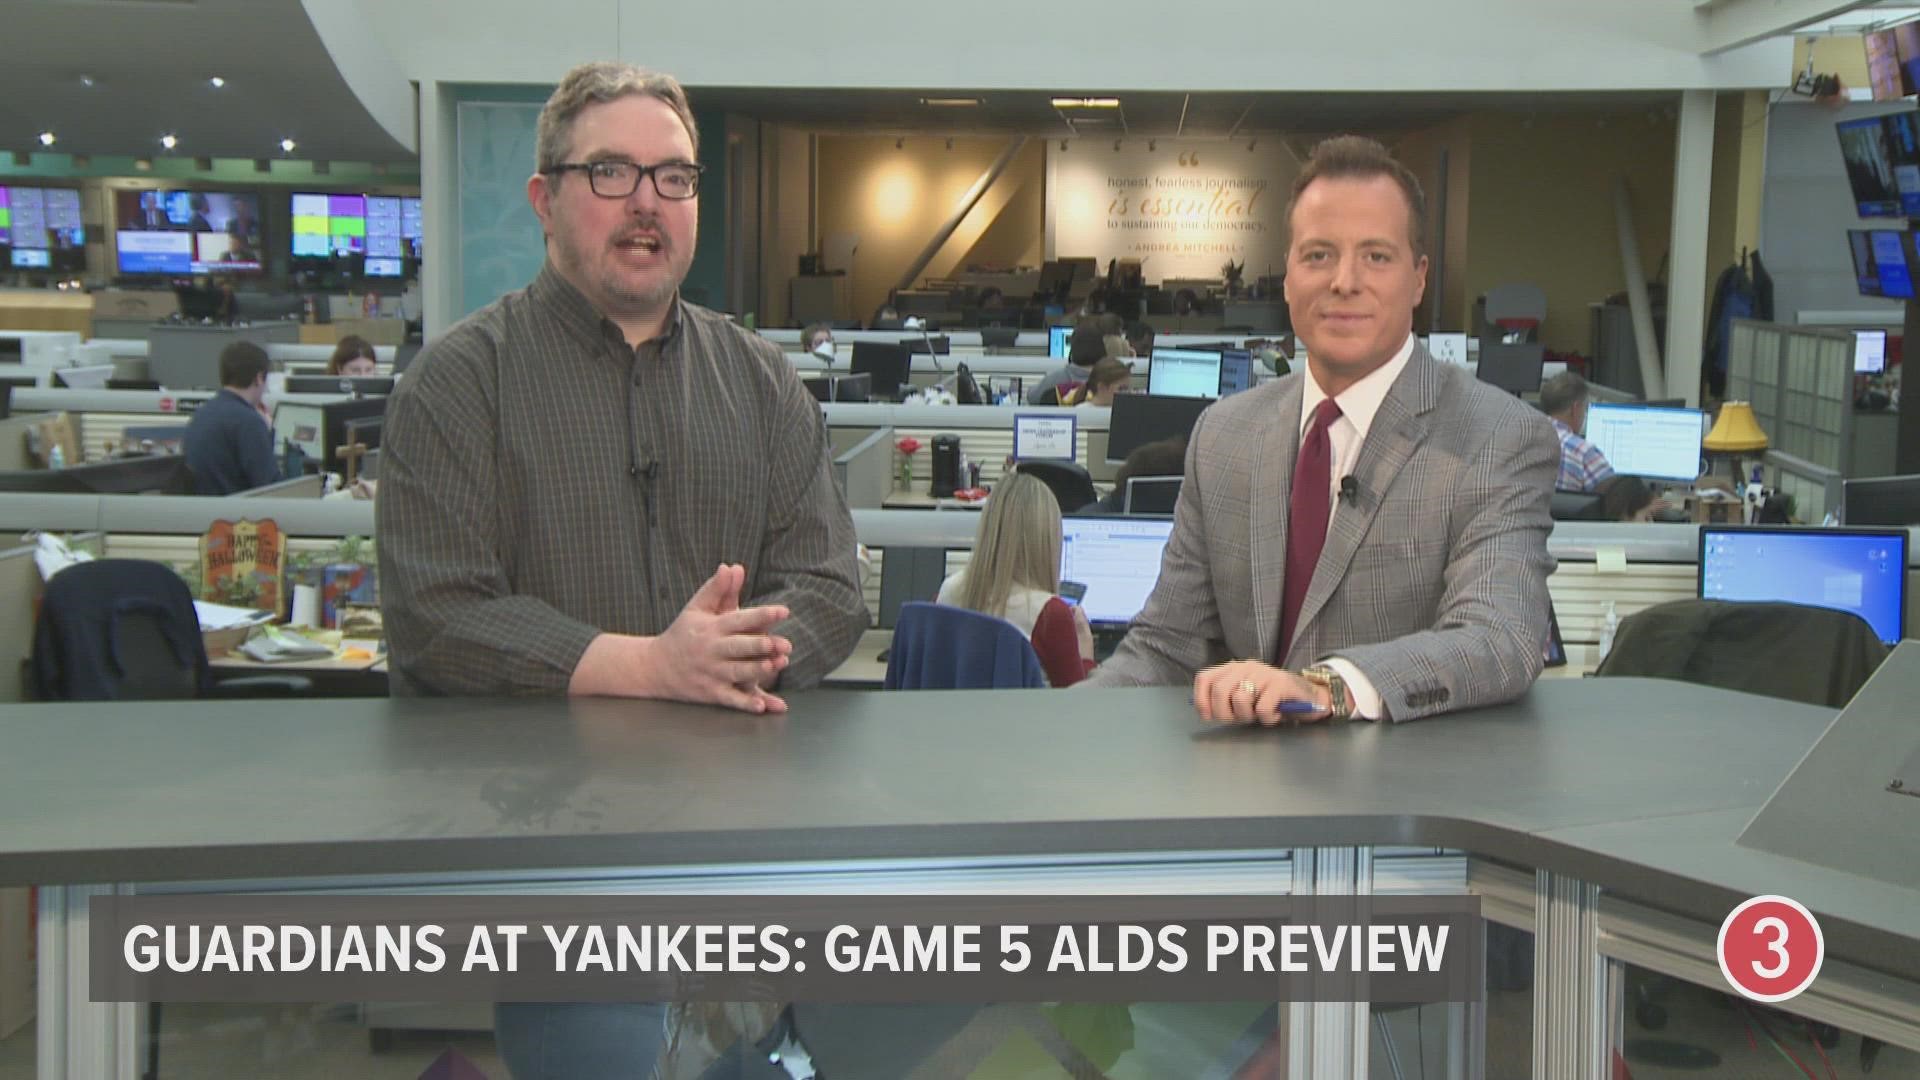 Nick Camino and Dave DeNatale have a preview of the Cleveland Guardians and New York Yankees Game 5 ALDS.